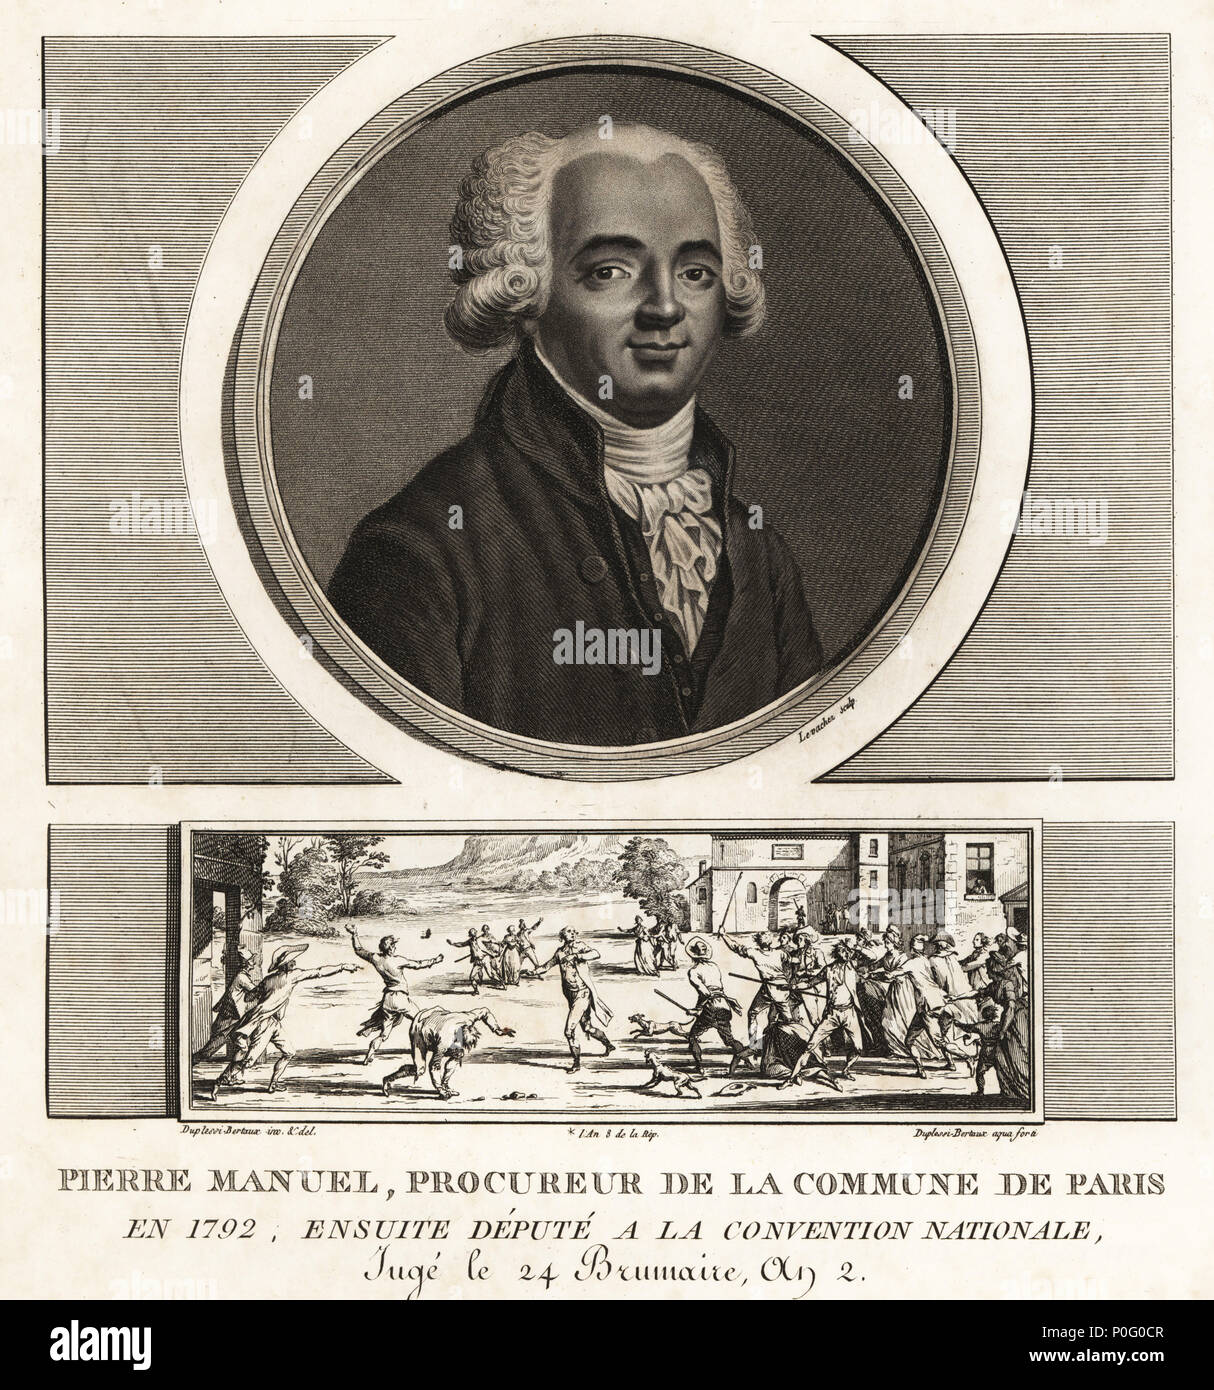 Louis Pierre Manuel, writer, Prucurer to the Commune of Paris, guillotined  1793. Vignette shows Manuel attacked by a group of Jacobins. Mezzotint  drawn and engraved by Jean Duplessis-Bertaux from his Collection Complete